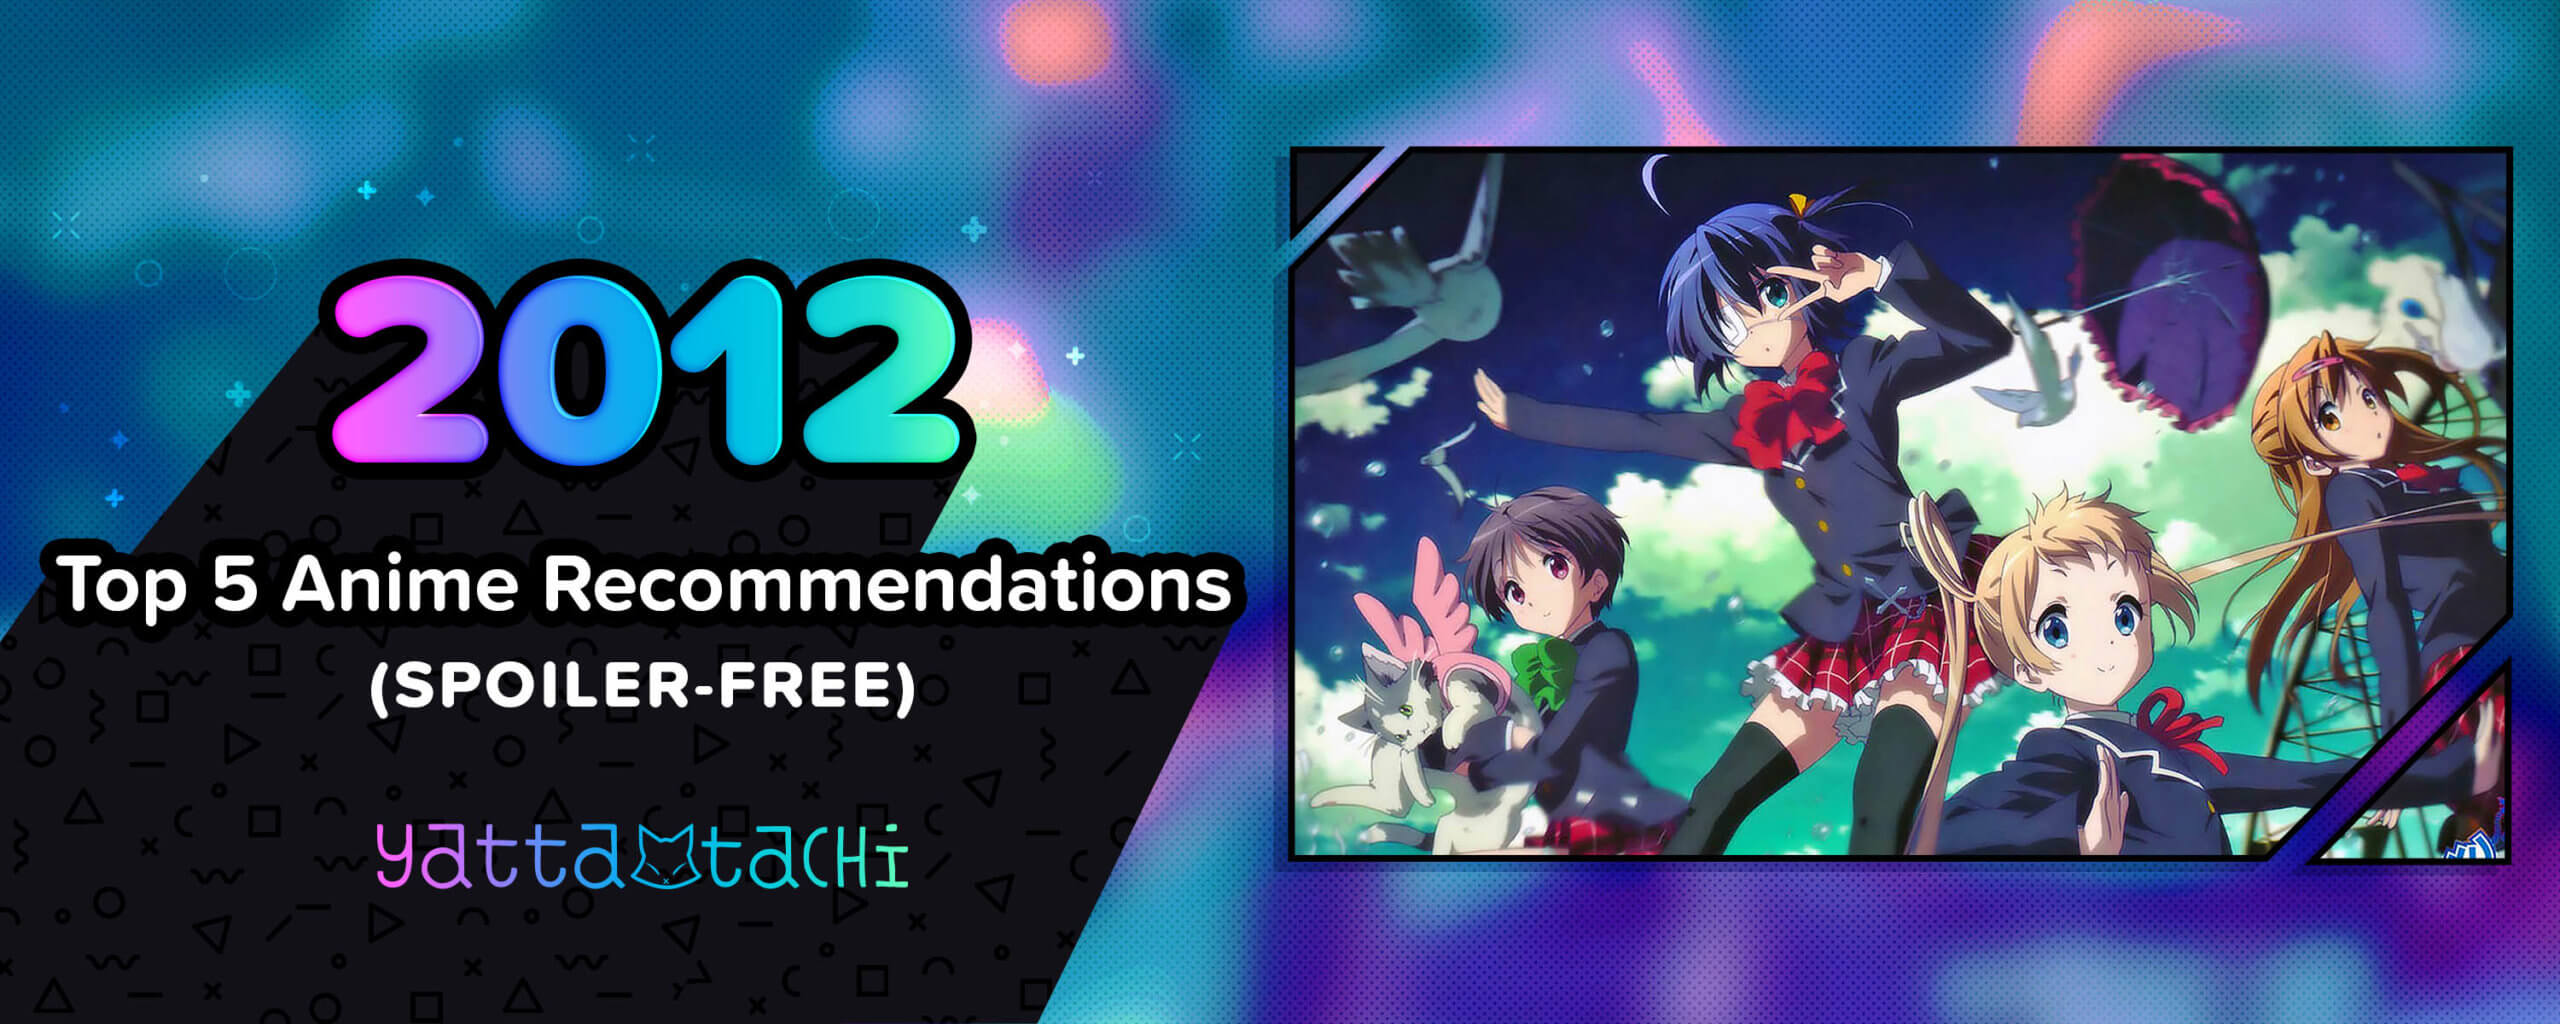 Top 9 Slice Of Life Anime Recommendations To Check Out In 2020/2021! [Guest  Blog] » OmniGeekEmpire